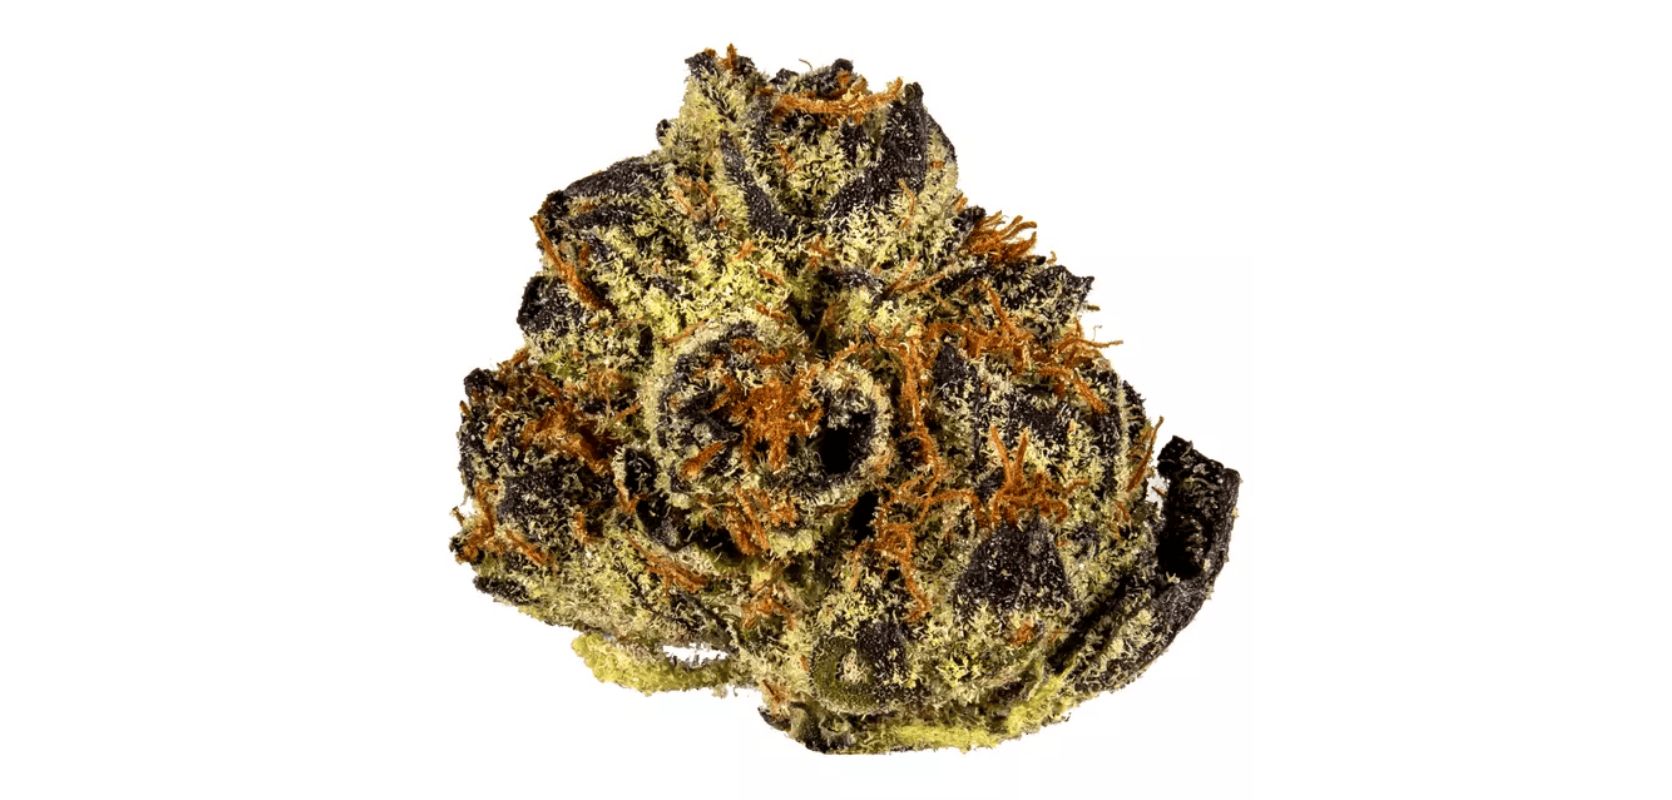 Ice Cream Cake strain is an indica-dominant hybrid loved for its well-rounded cannabis experience.